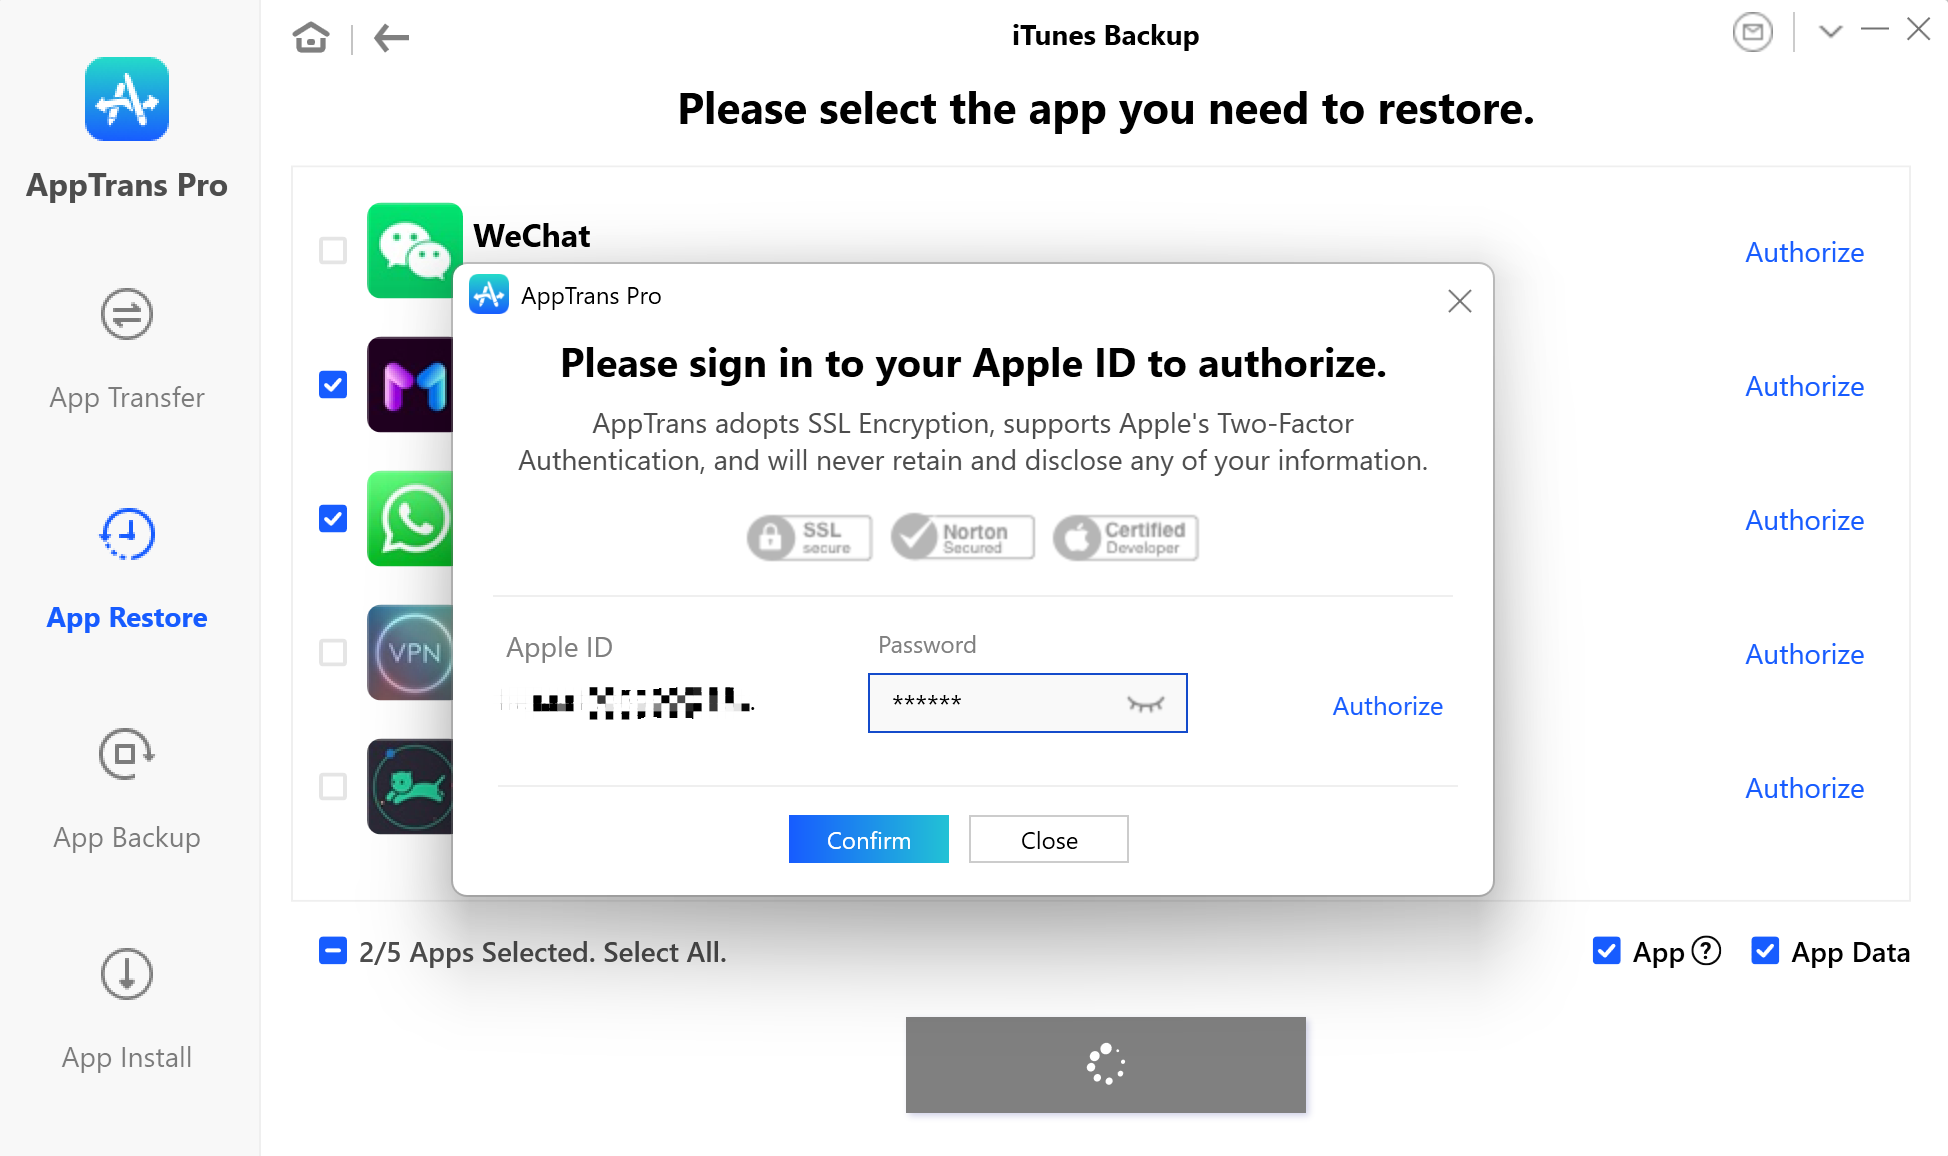 Sigin in to Apple ID to Authorize iCloud Account